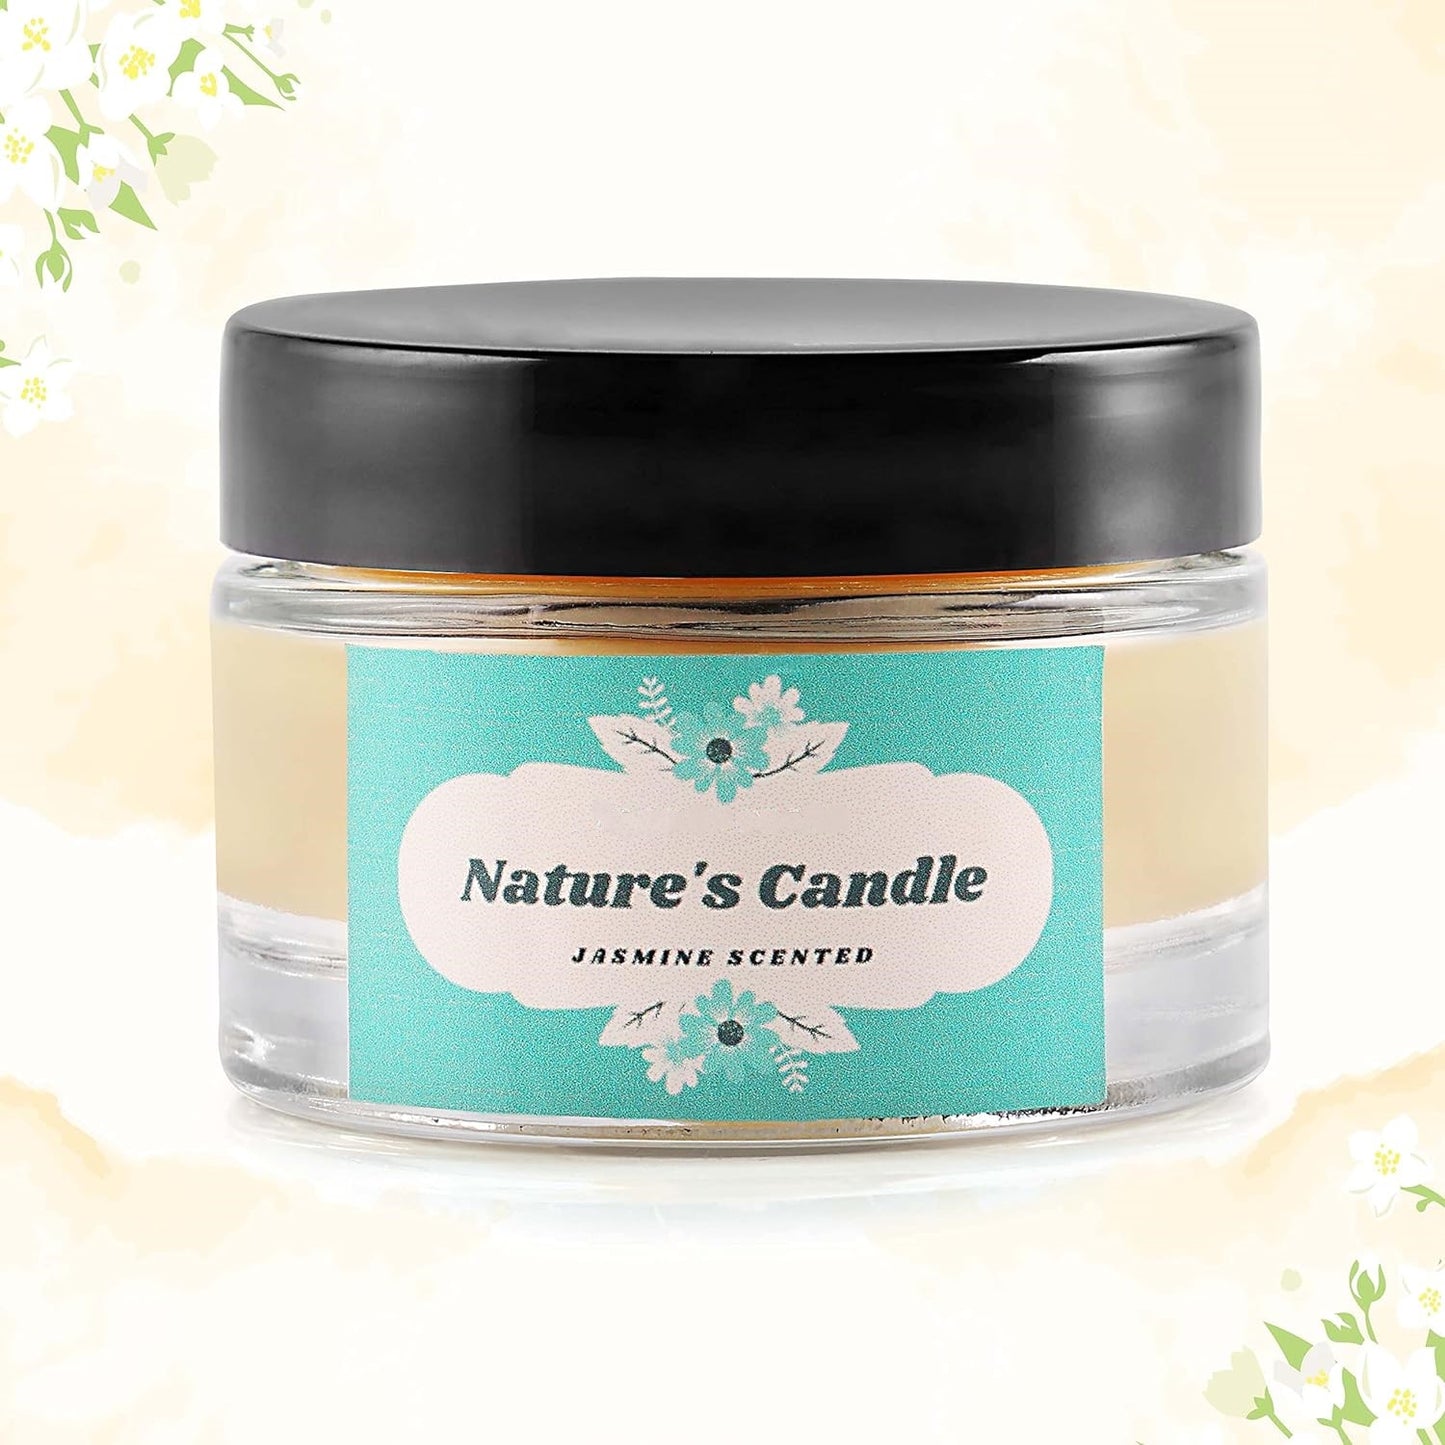 Nature's Candle